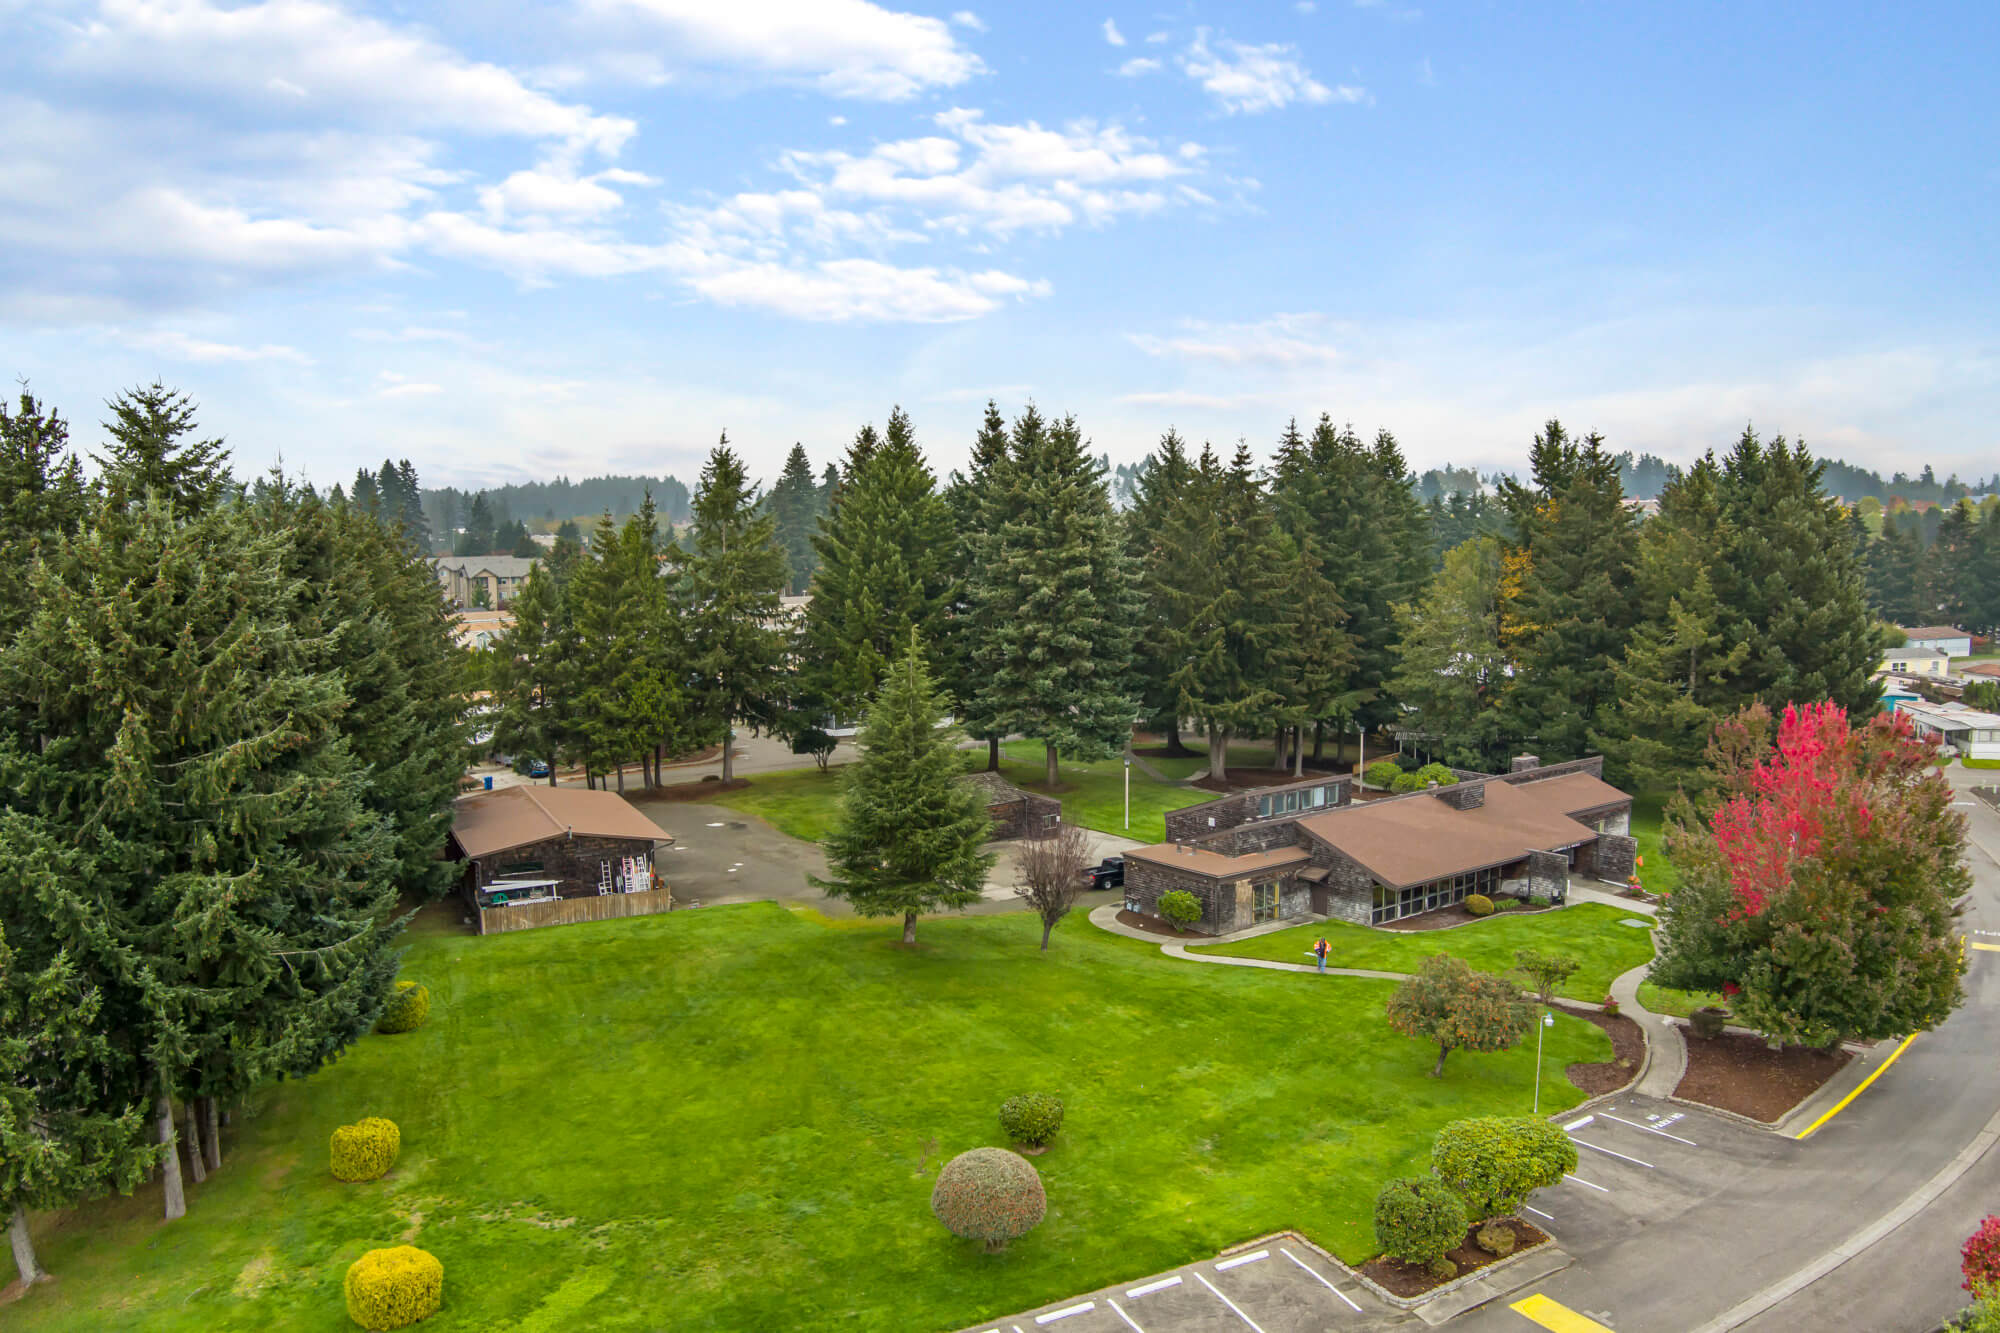 Aerial view of a manufactured home community surrounded by natural spaces.